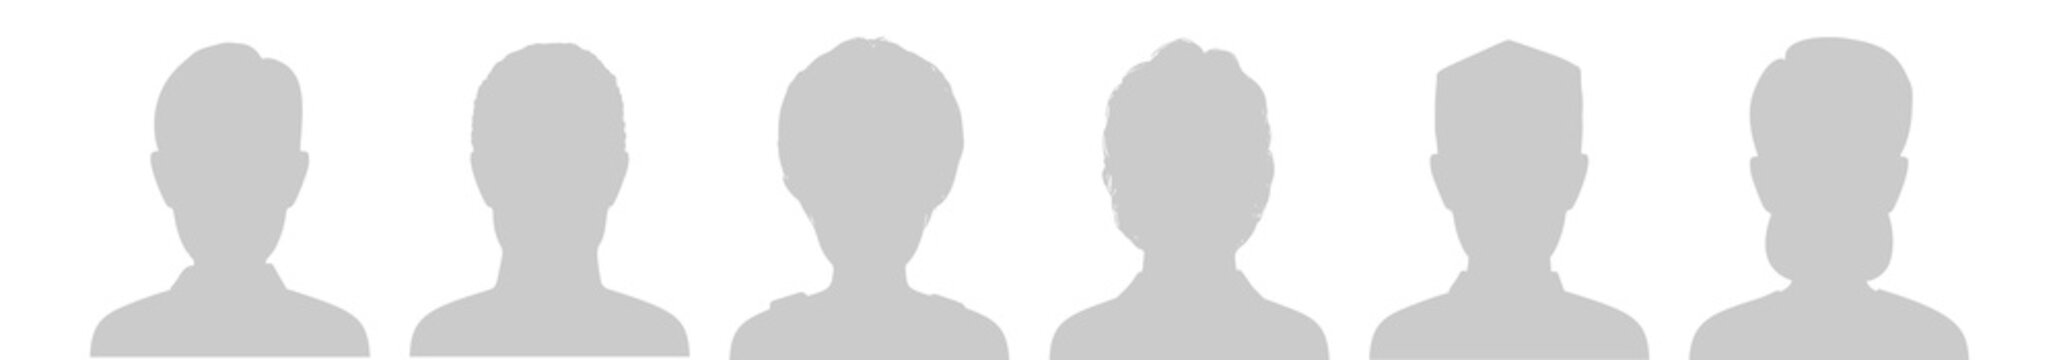 Profile Placeholder Image. Gray Silhouette No Photo